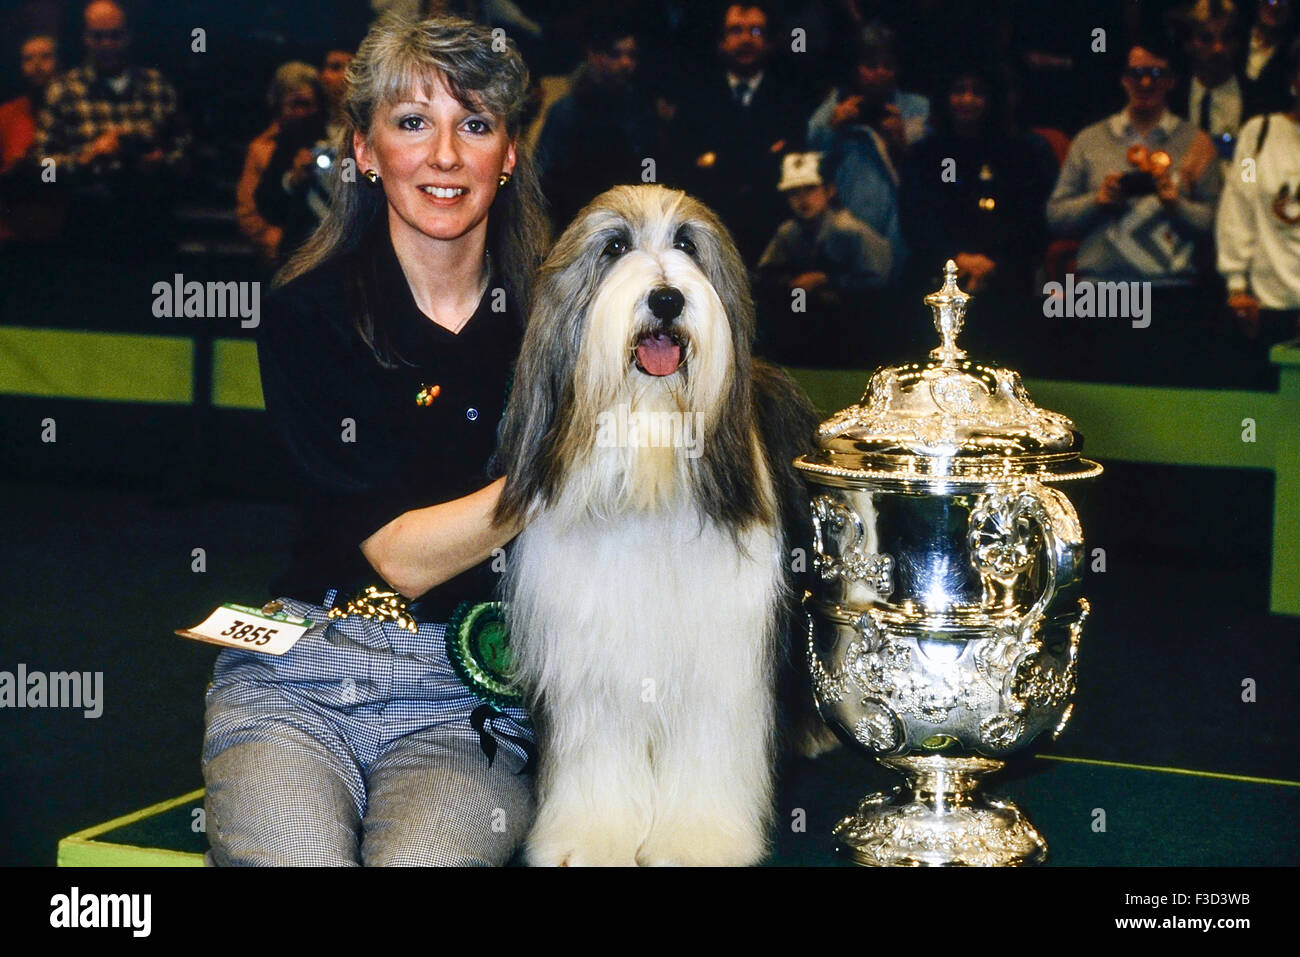 Crufts 1989 Best in show winner. Potterdale Classic of Moonhill. Bearded Collie. Owned by Brenda White. Earls Court. London. England, UK Stock Photo